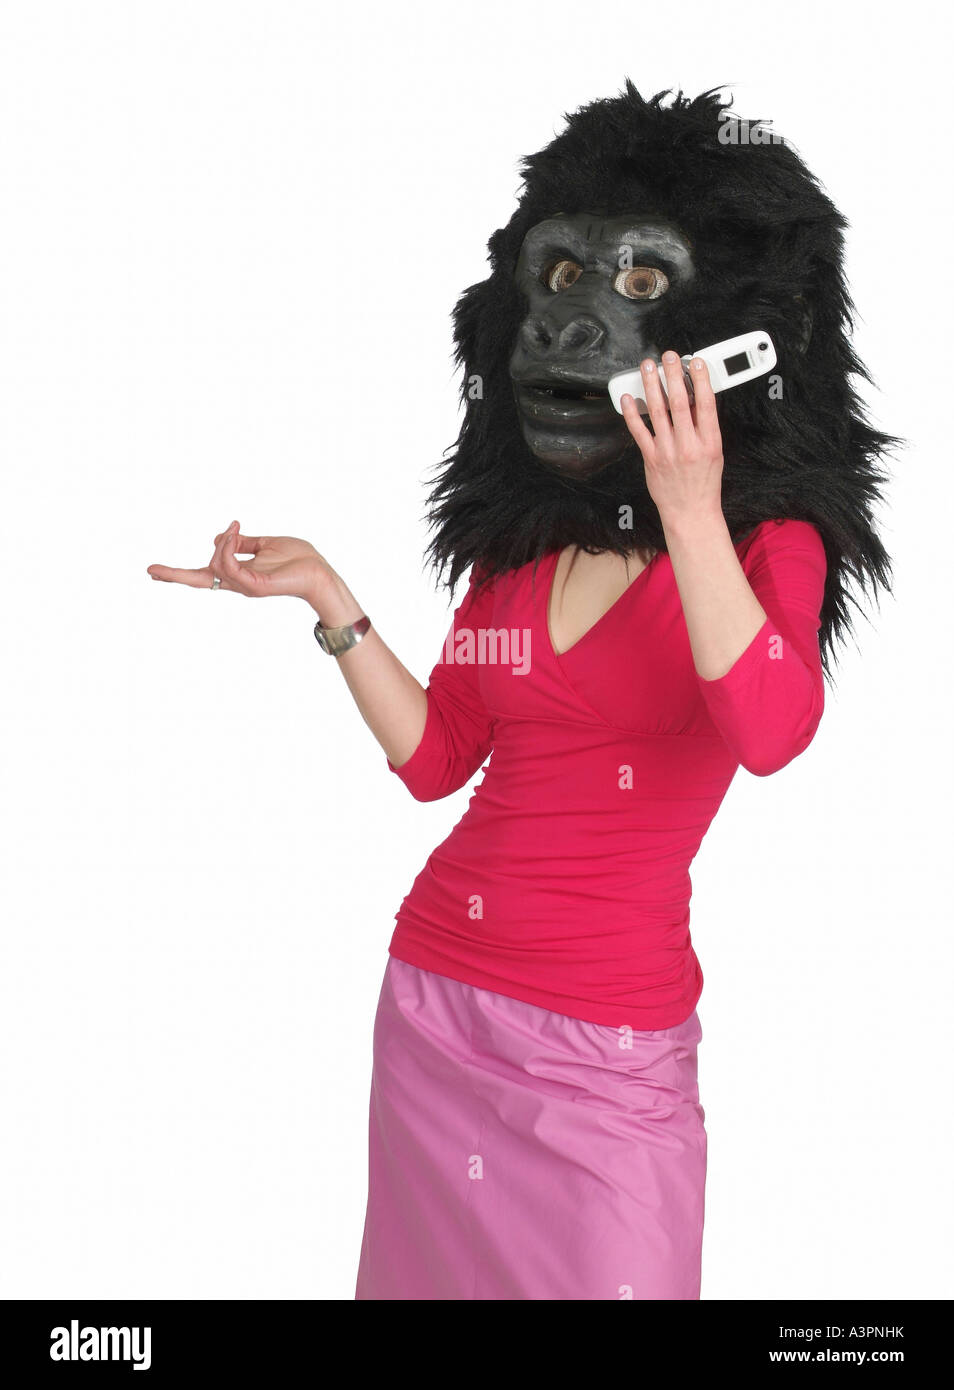 Woman wearing the head of a gorilla costume and making a phone call Stock Photo